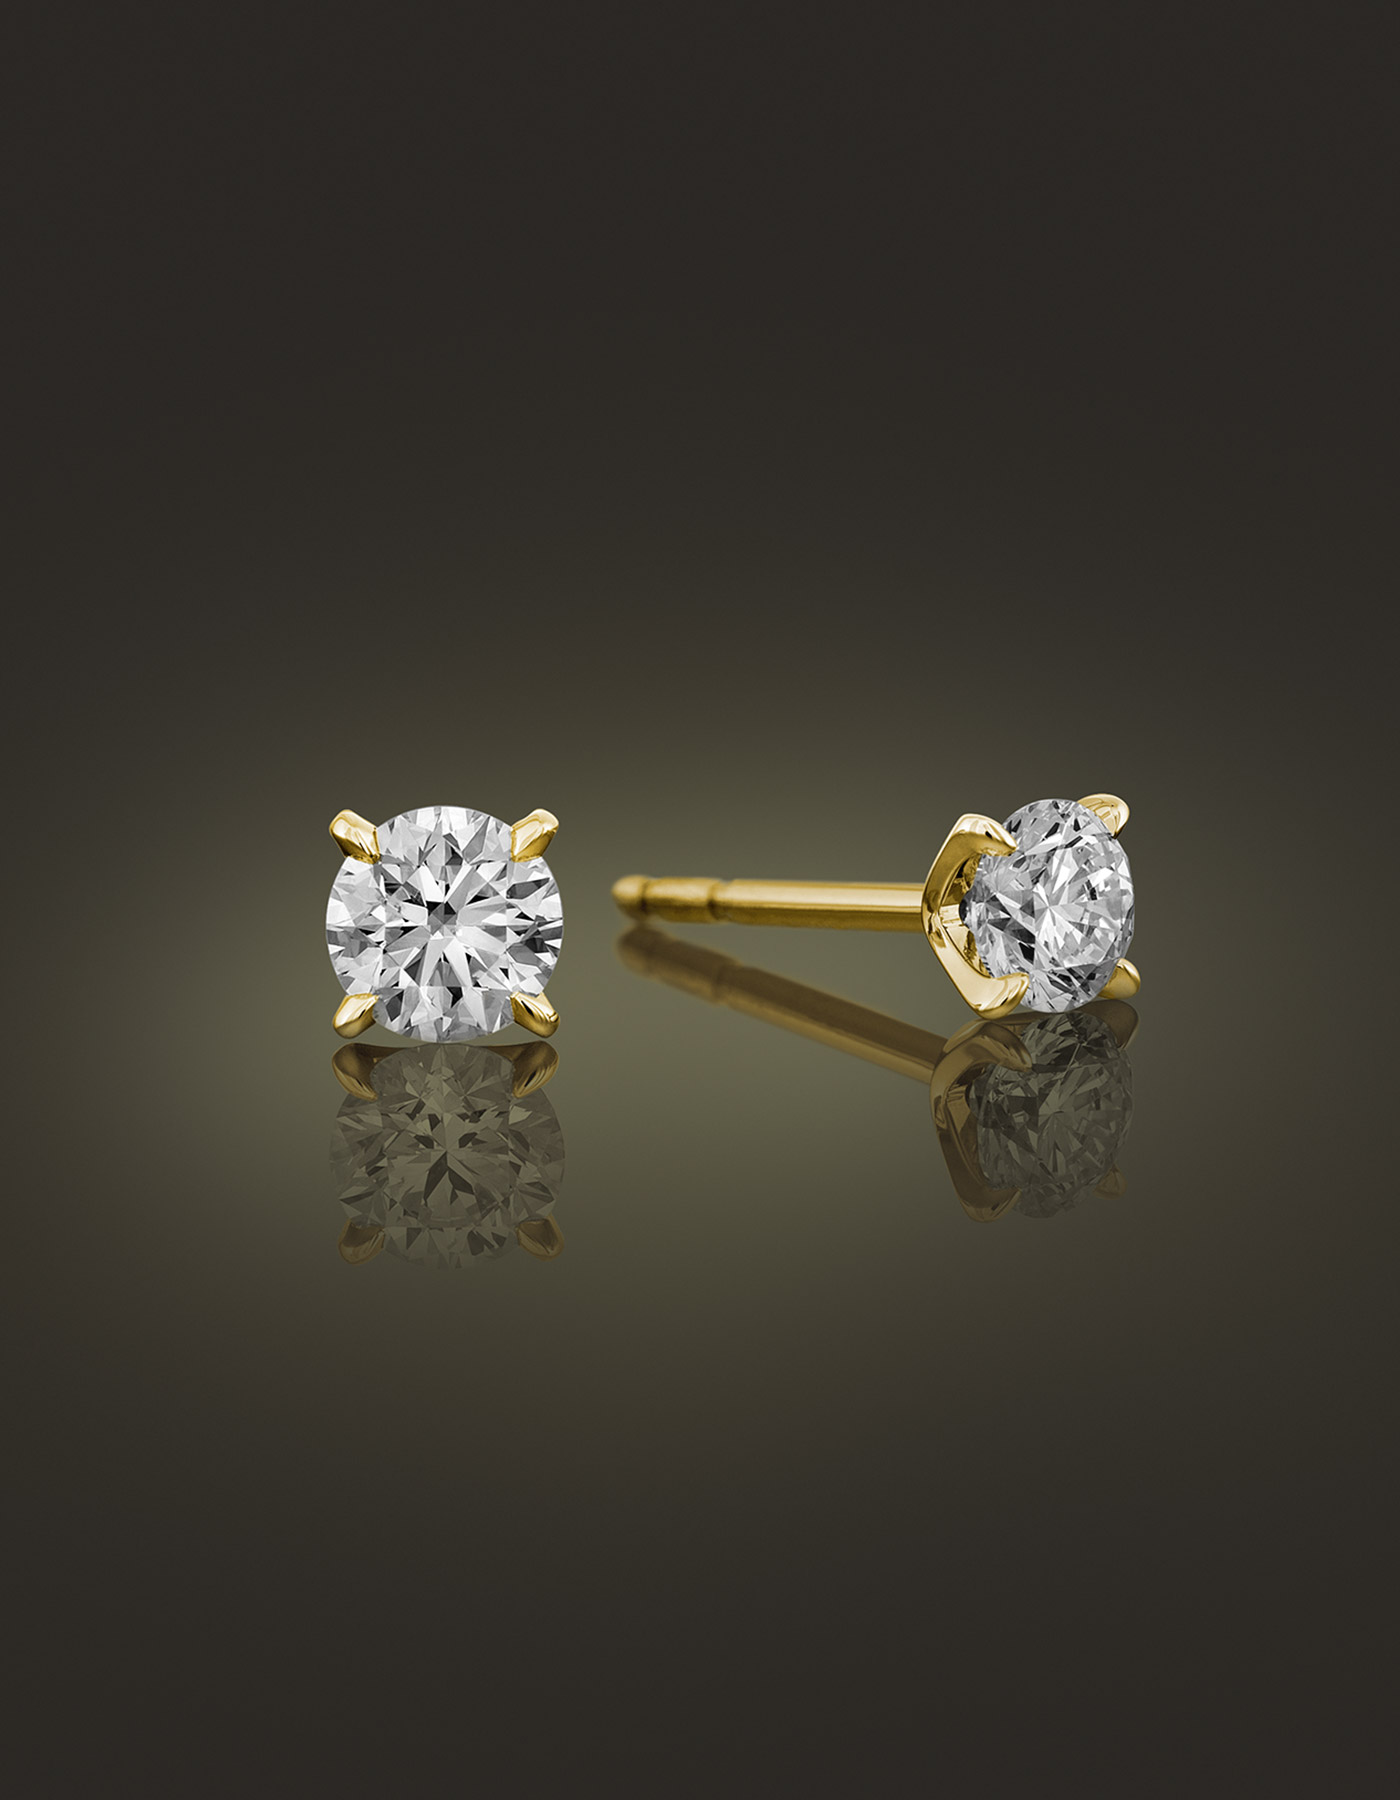 Guinnot Anonymous Solitaire diamond earrings in 18k yellow gold